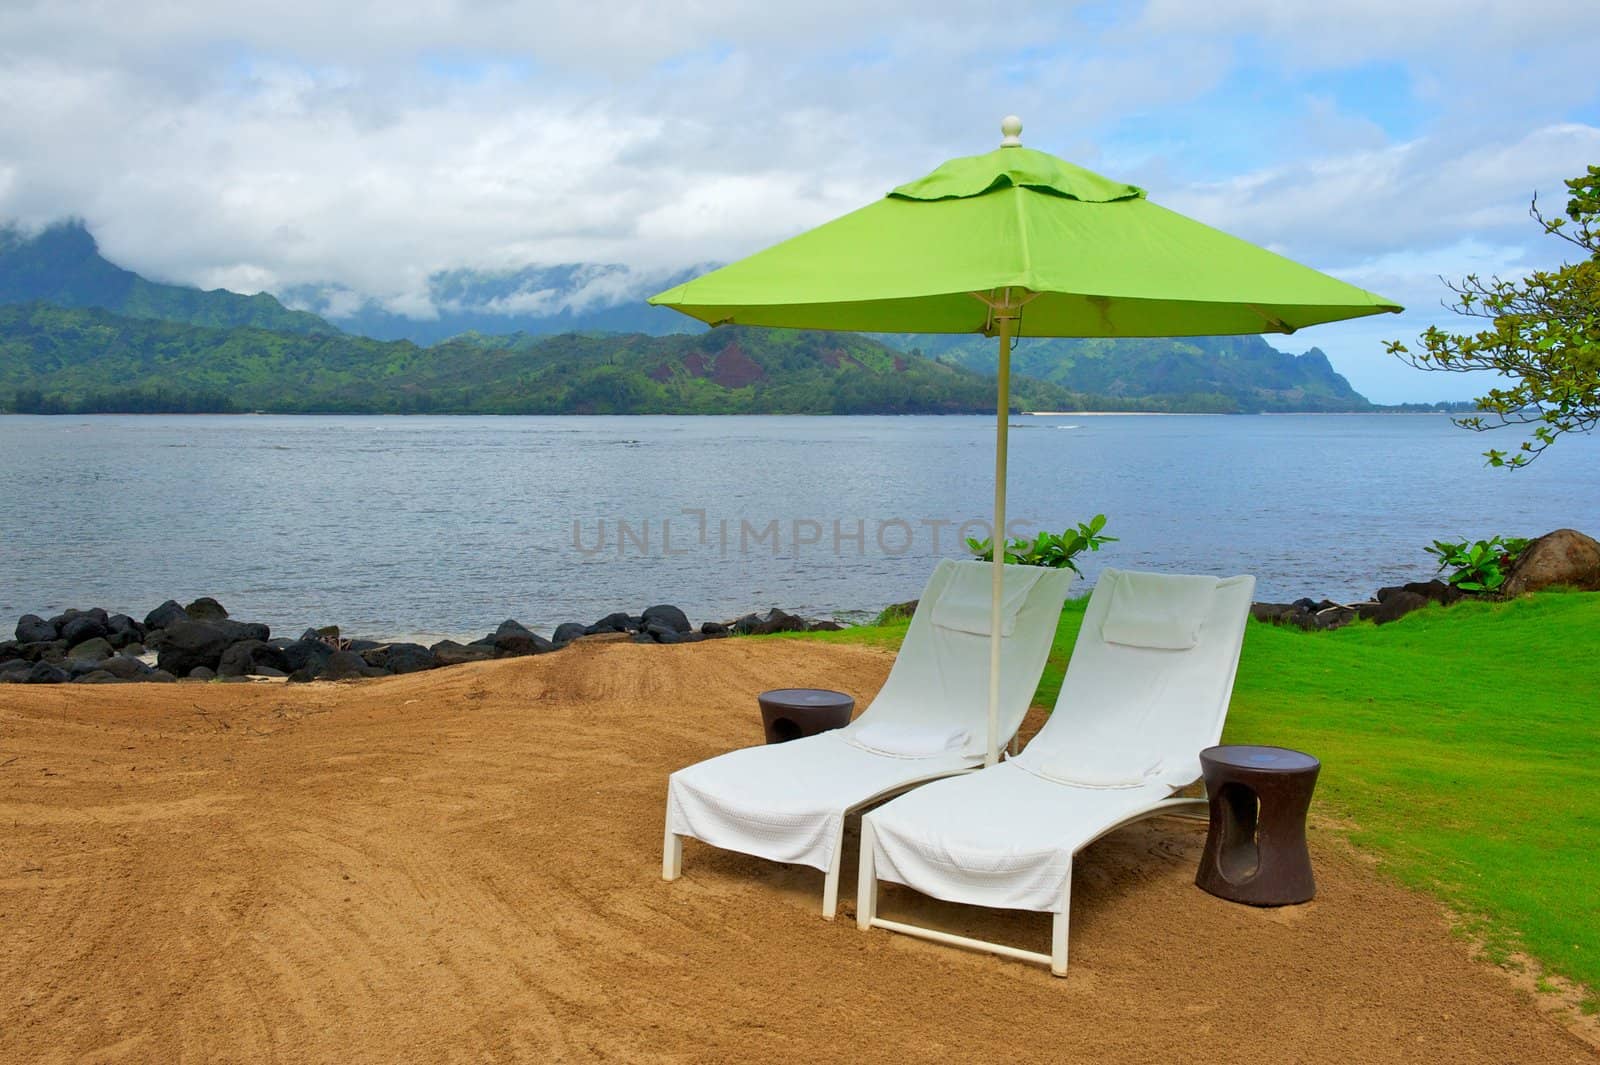 Two therapy chairs and a green ubmrella sit near the coastline on the island of Kauai in Hawaii